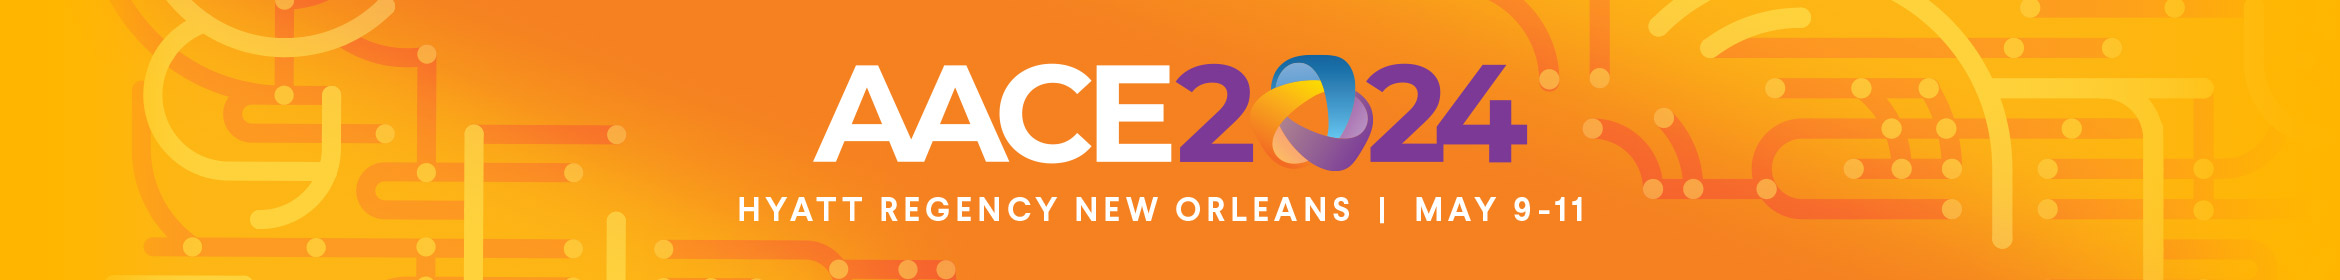 AACE 2024 Annual Meeting Main banner